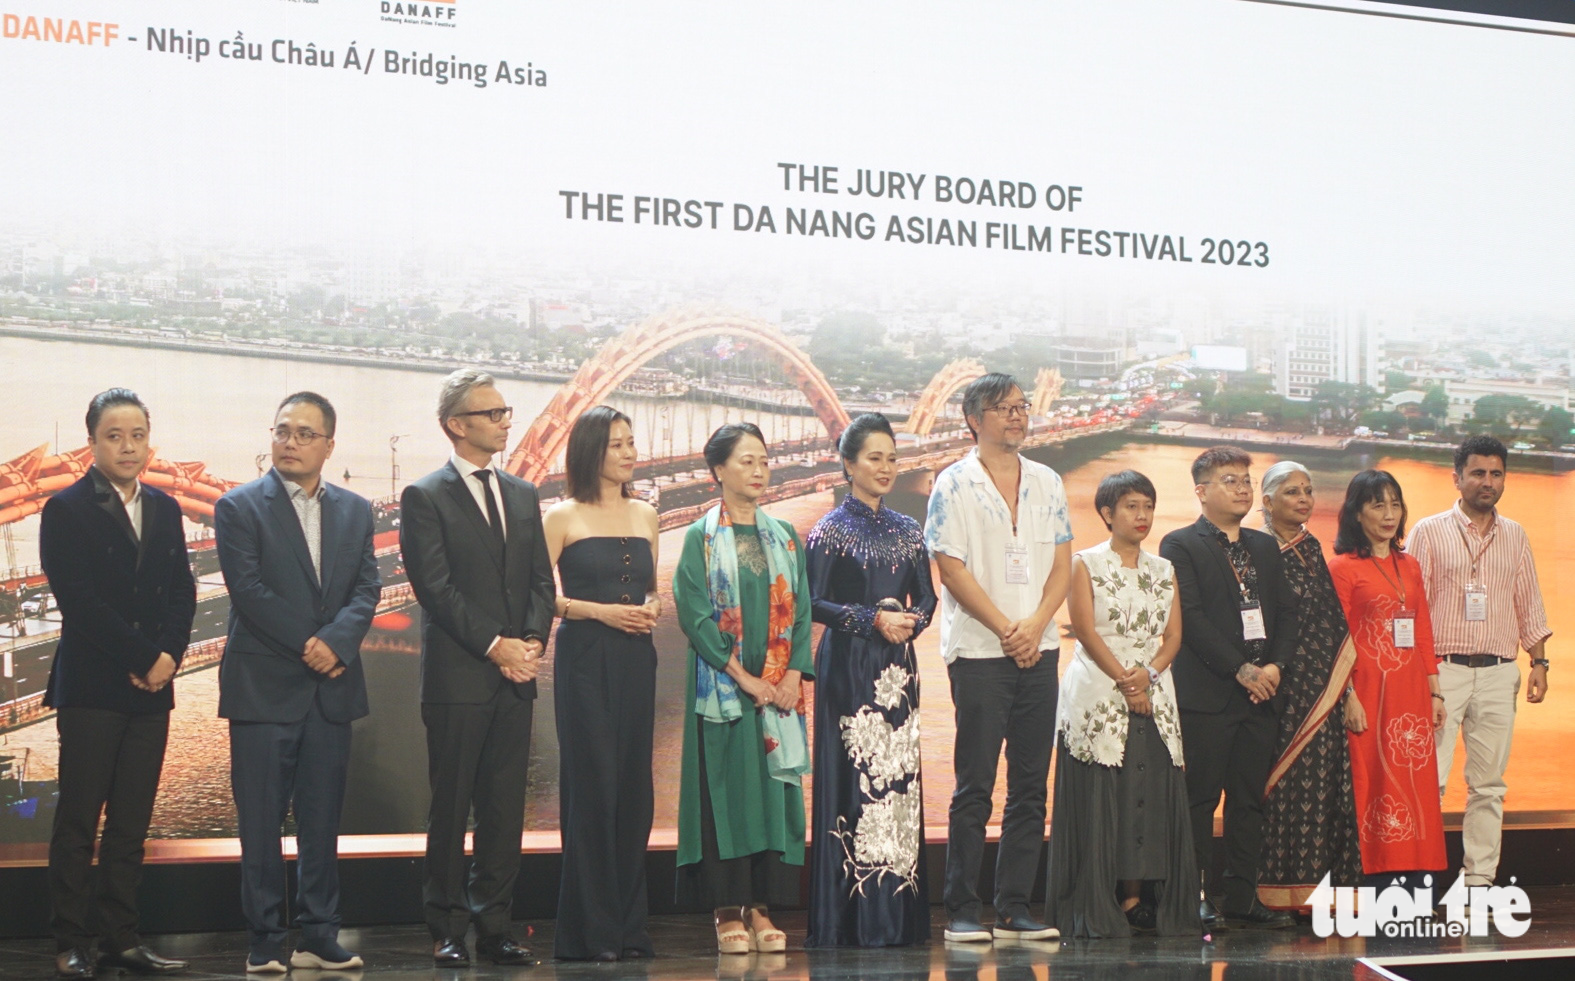 The jury board of the inaugural Da Nang Asian Film Festival (DANAFF) is introduced during the opening ceremony in Da Nang City, central Vietnam, May 9, 2023. Photo: Tran Mac / Tuoi Tre